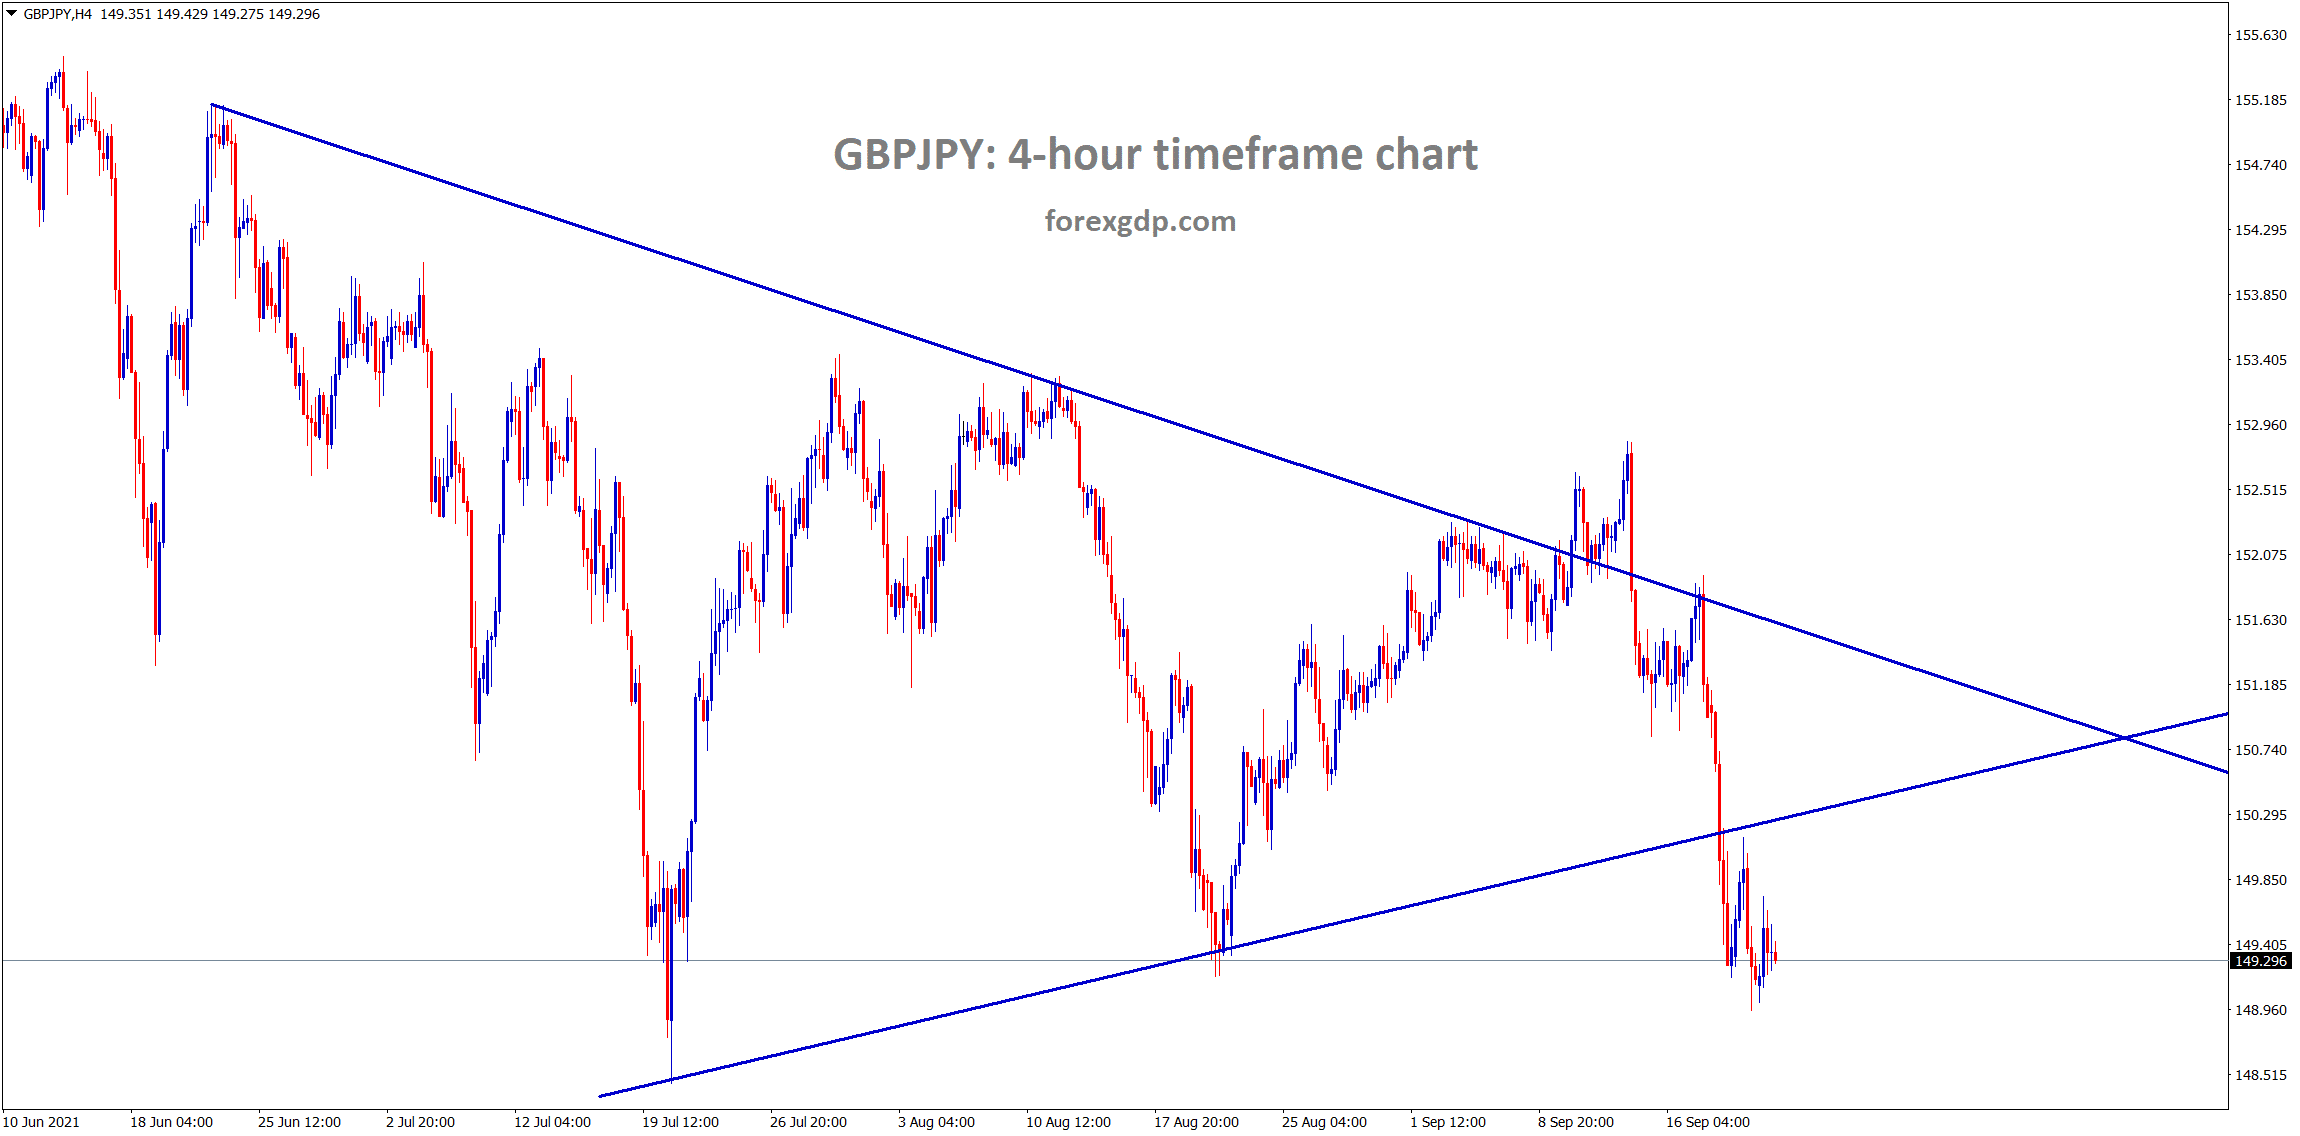 GBPJPY is at the horizontal support area breaking the symmetrical triangle pattern